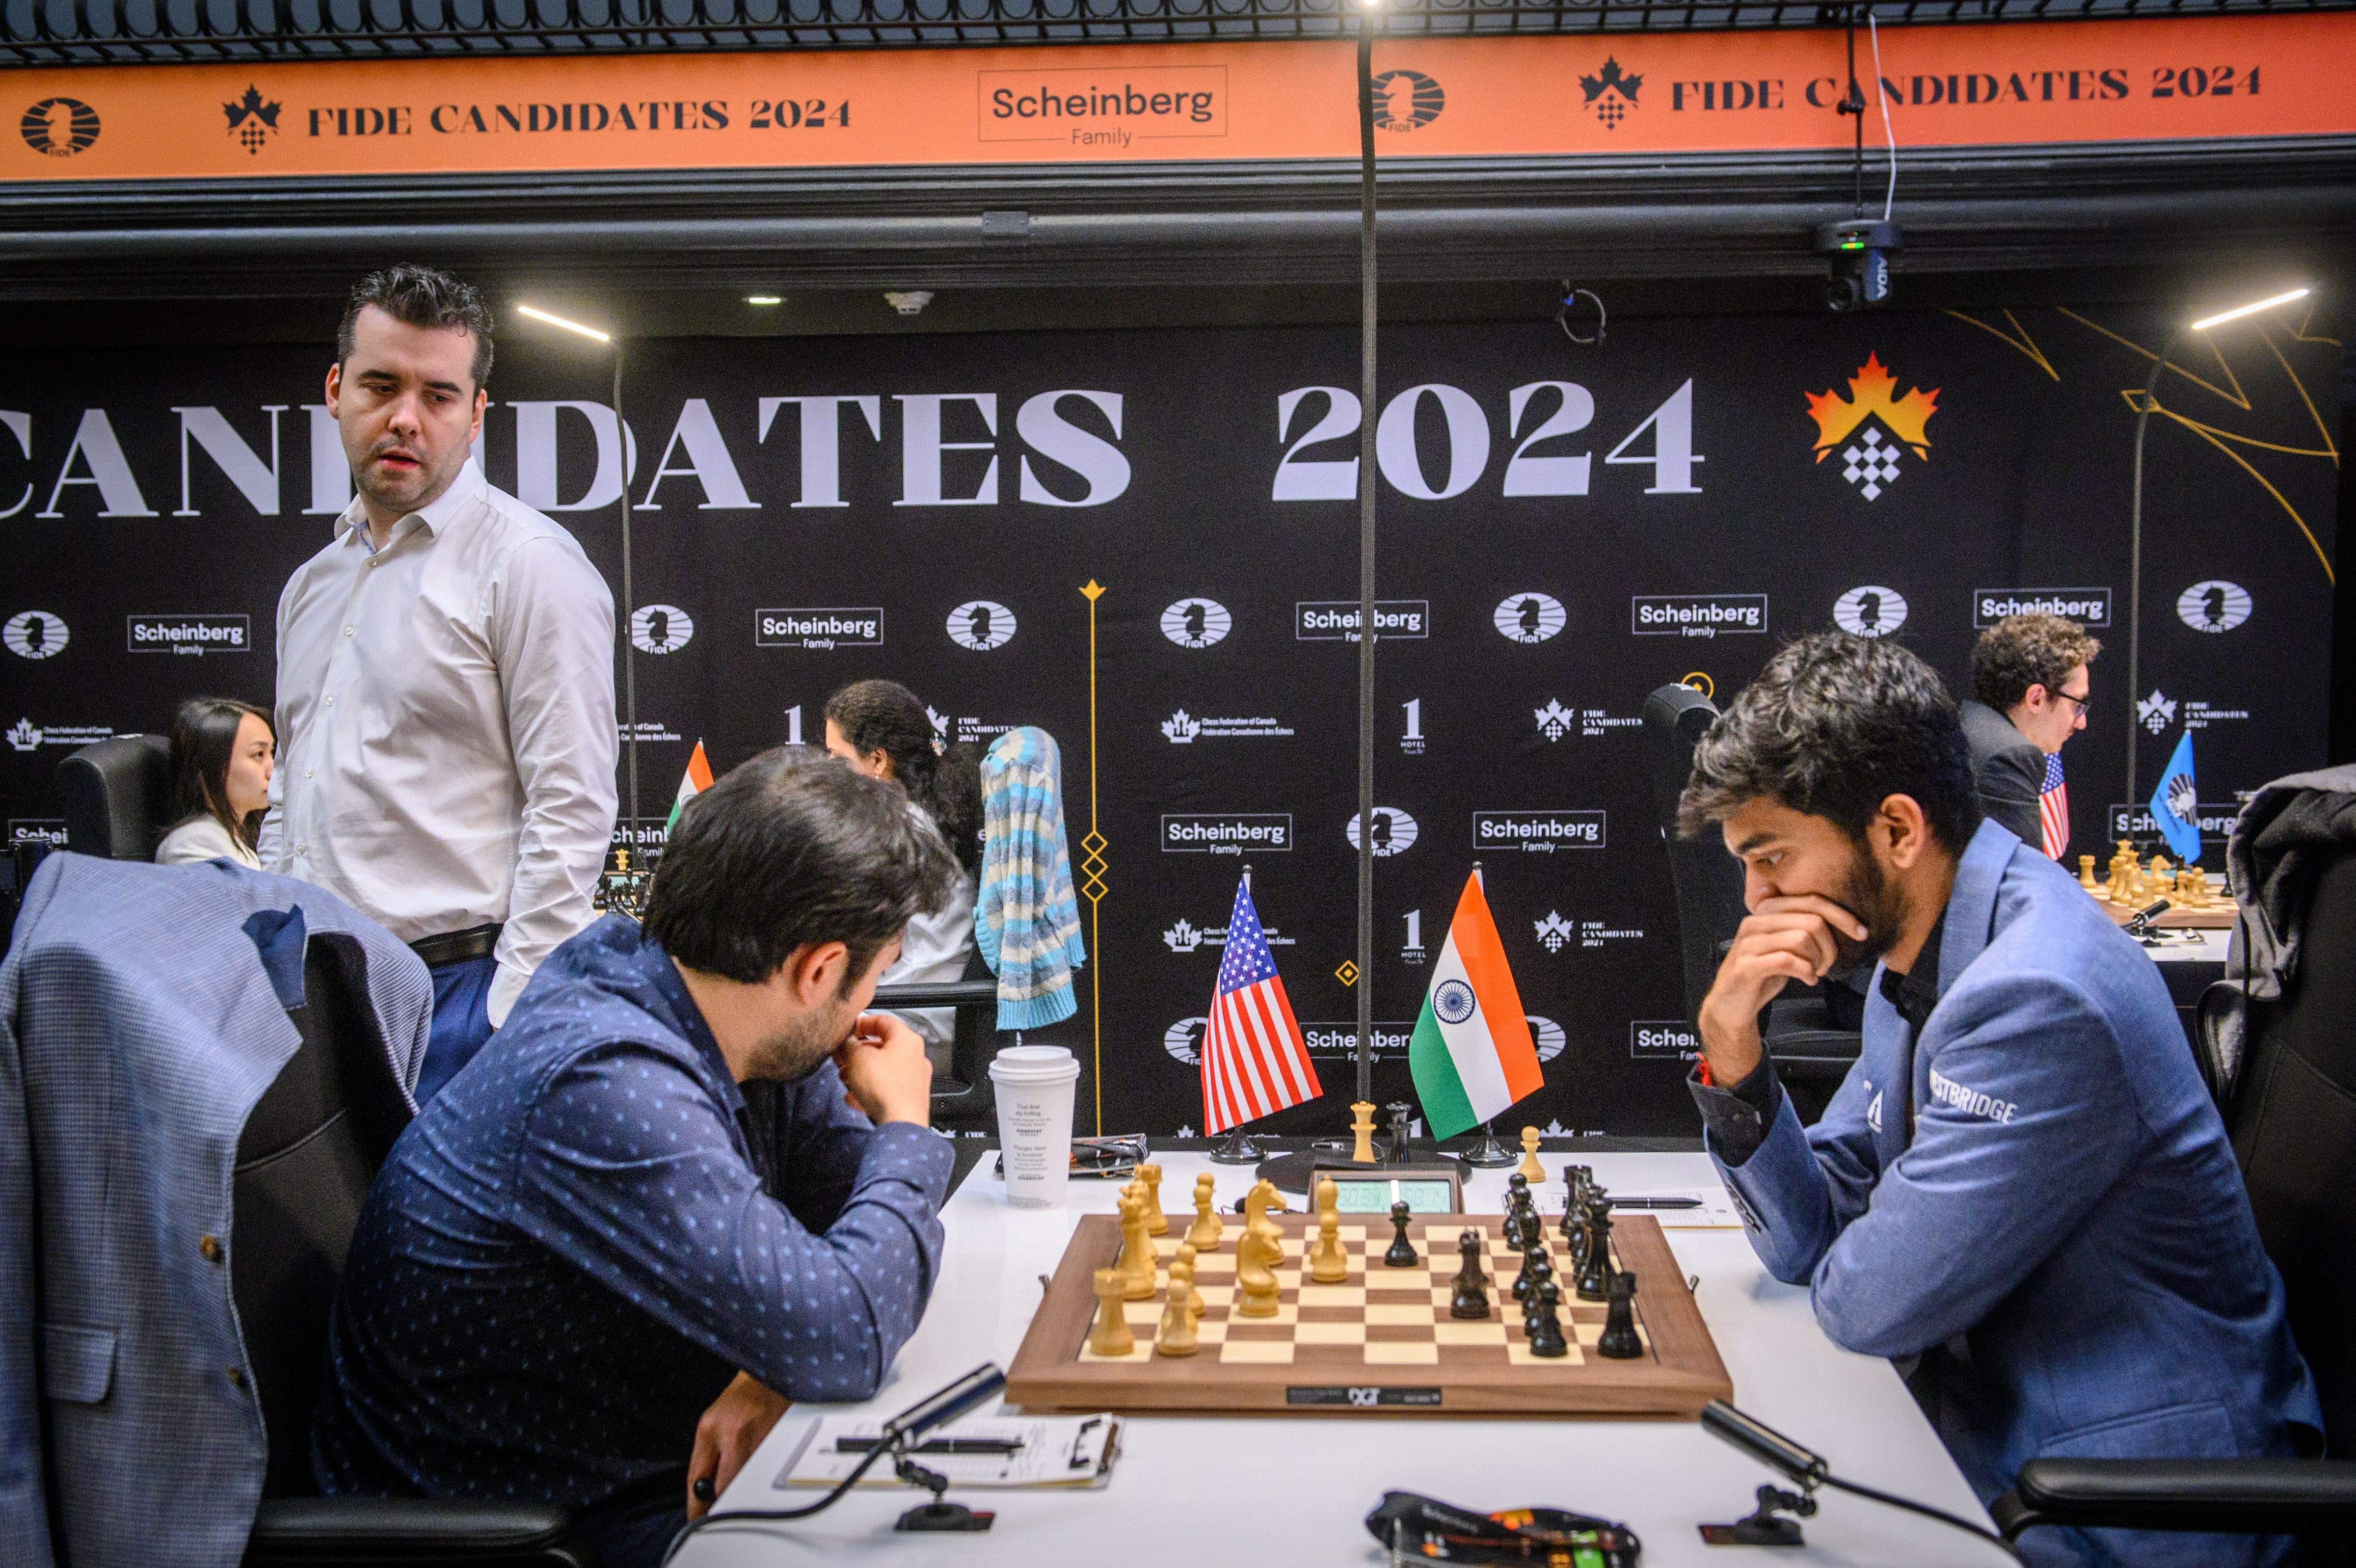  Who did he beat in FIDE Candidates 2024 final?